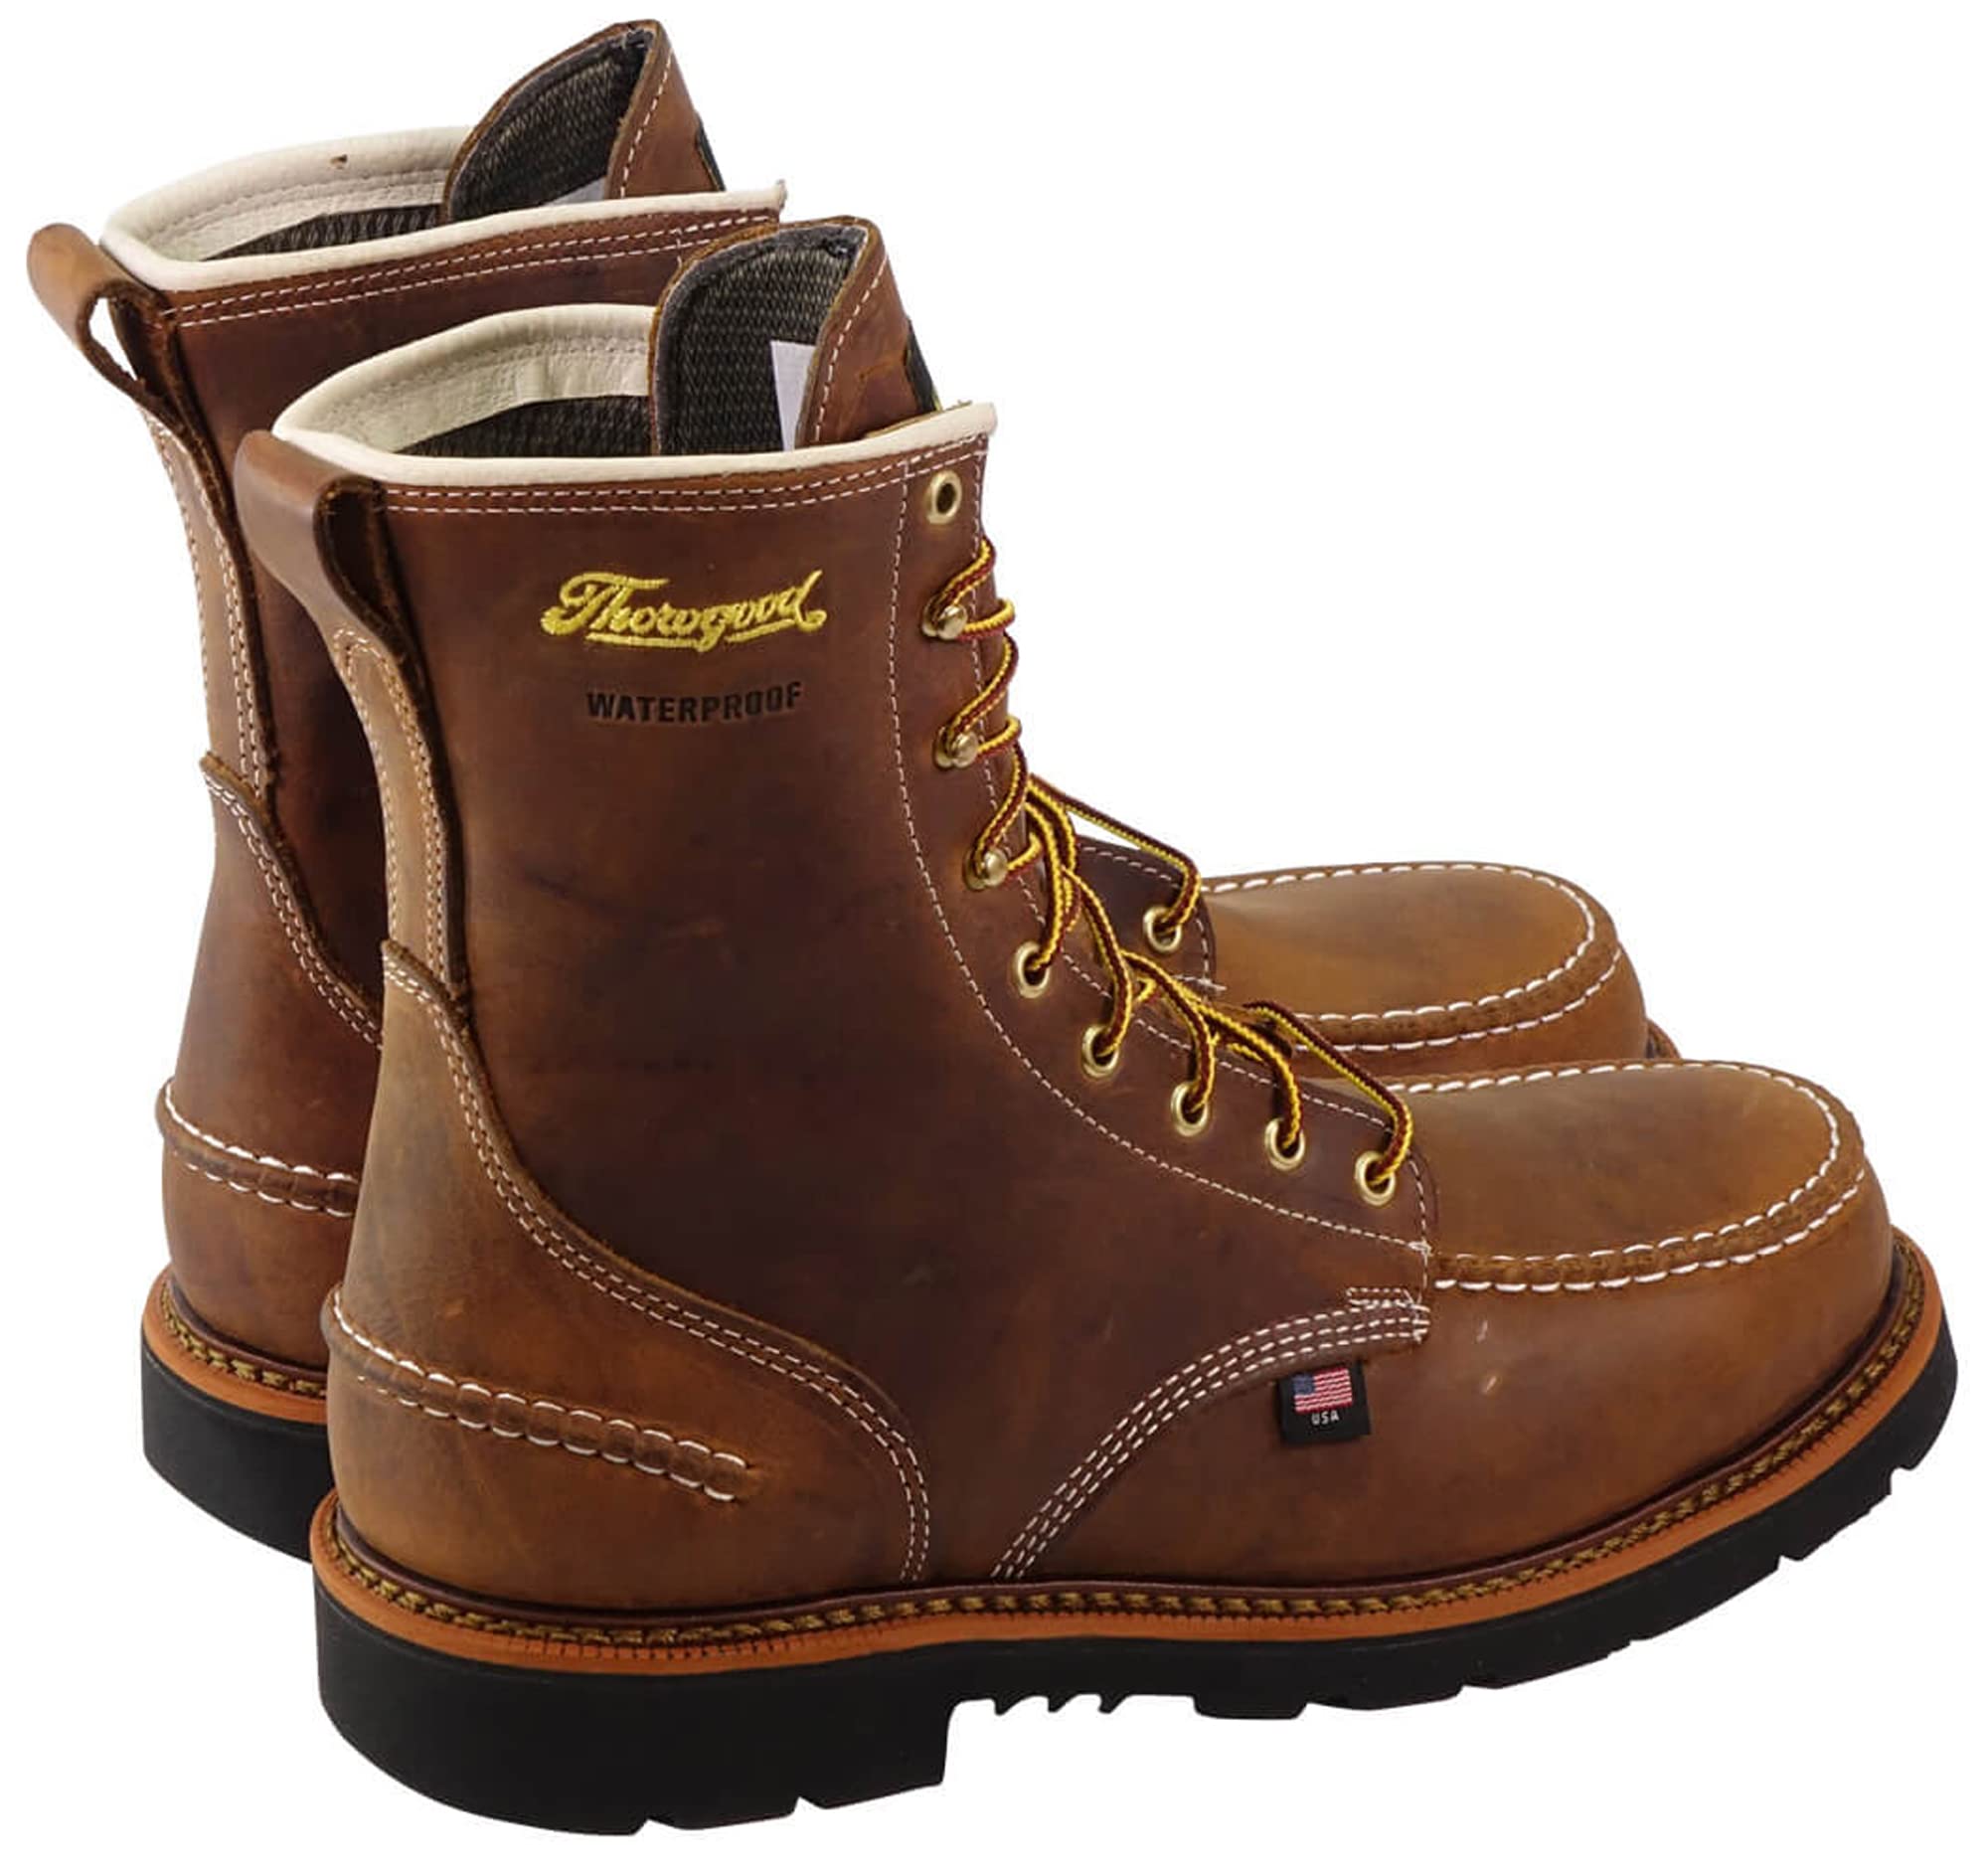 Thorogood 1957 Series 8” Waterproof Moc Toe Work Boots for Men - Soft Toe, Full-Grain Leather with Comfort Insole and Slip-Resistant Heel Outsole; EH Rated